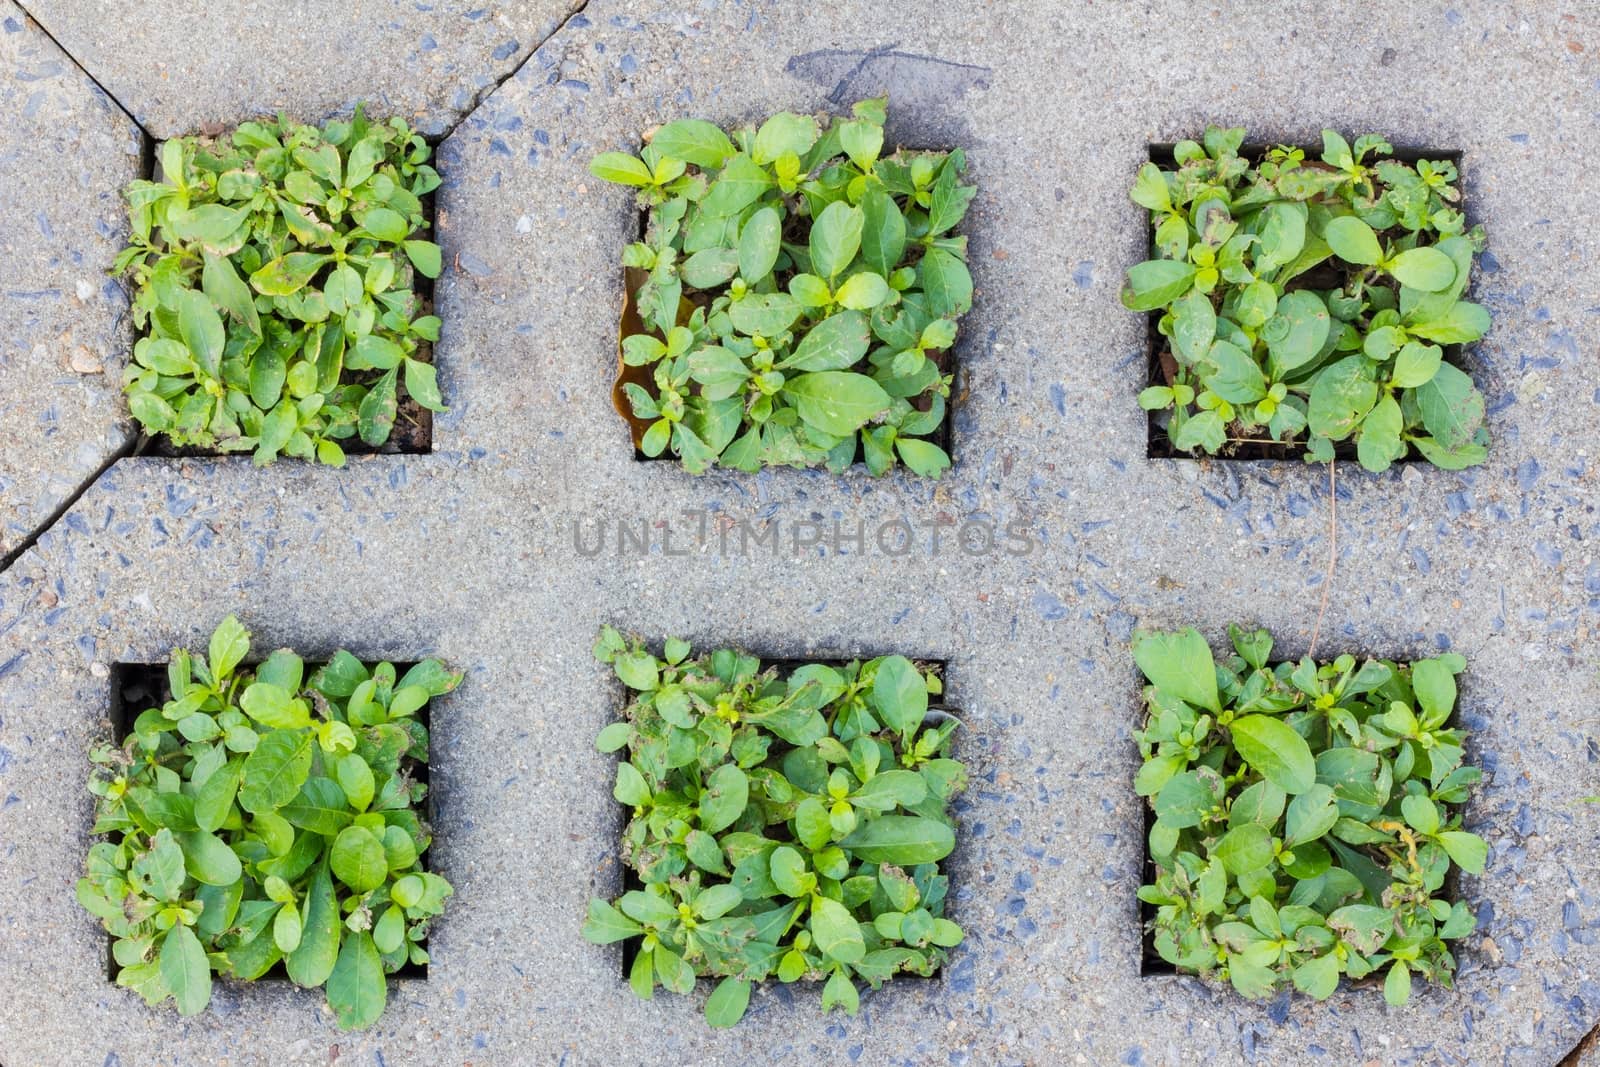 green plants growing between concrete pavement, background